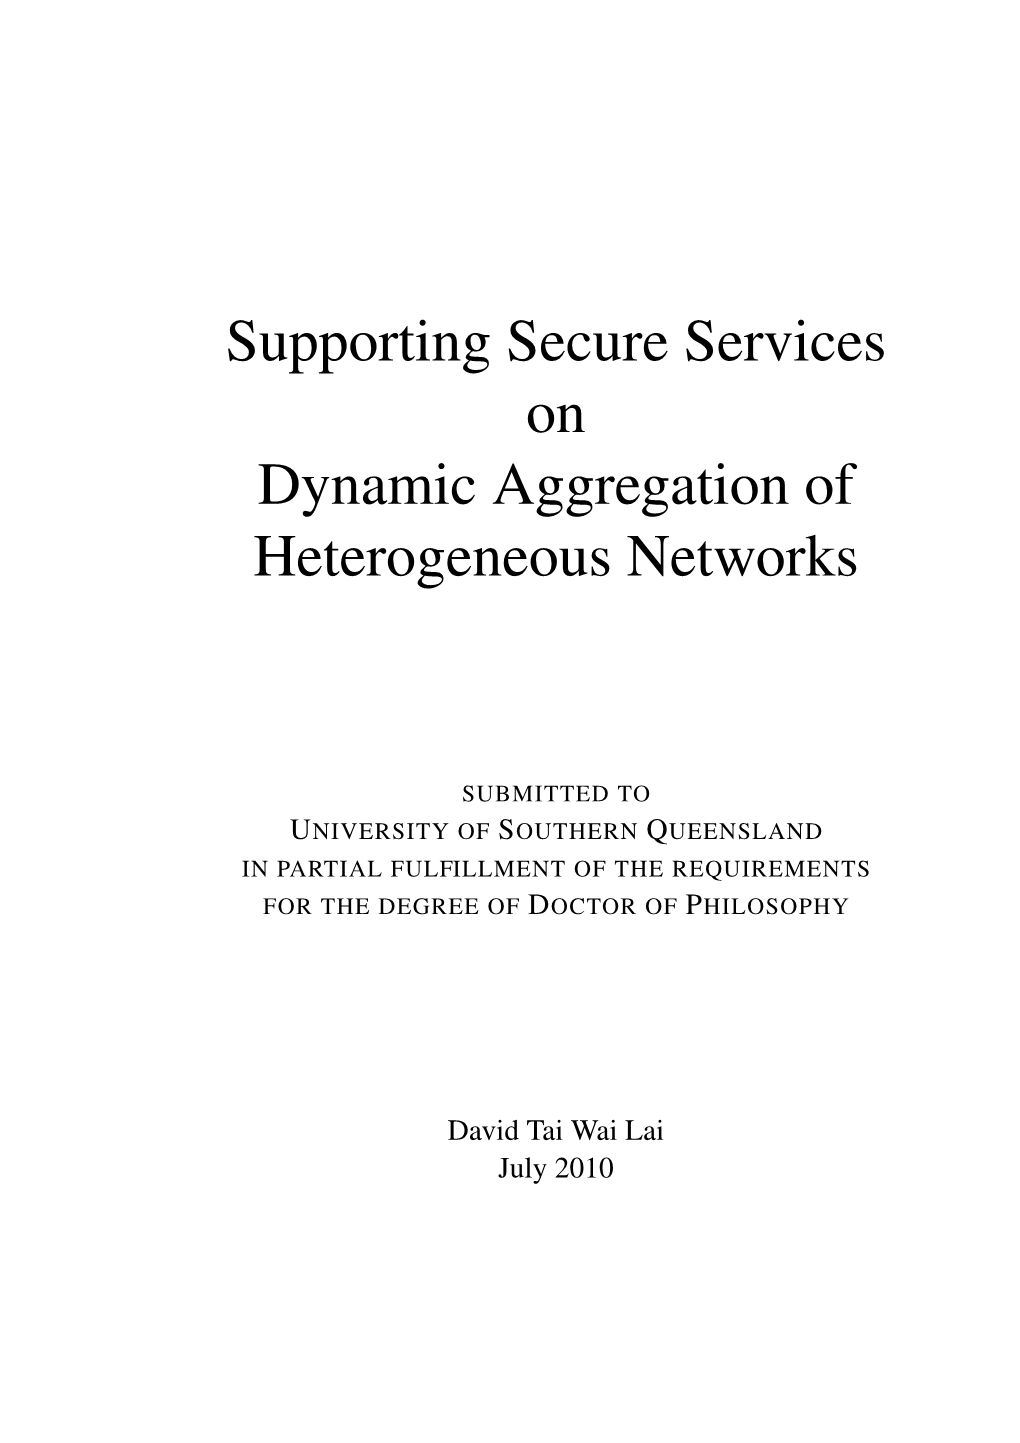 Supporting Secure Services on Dynamic Aggregation of Heterogeneous Networks